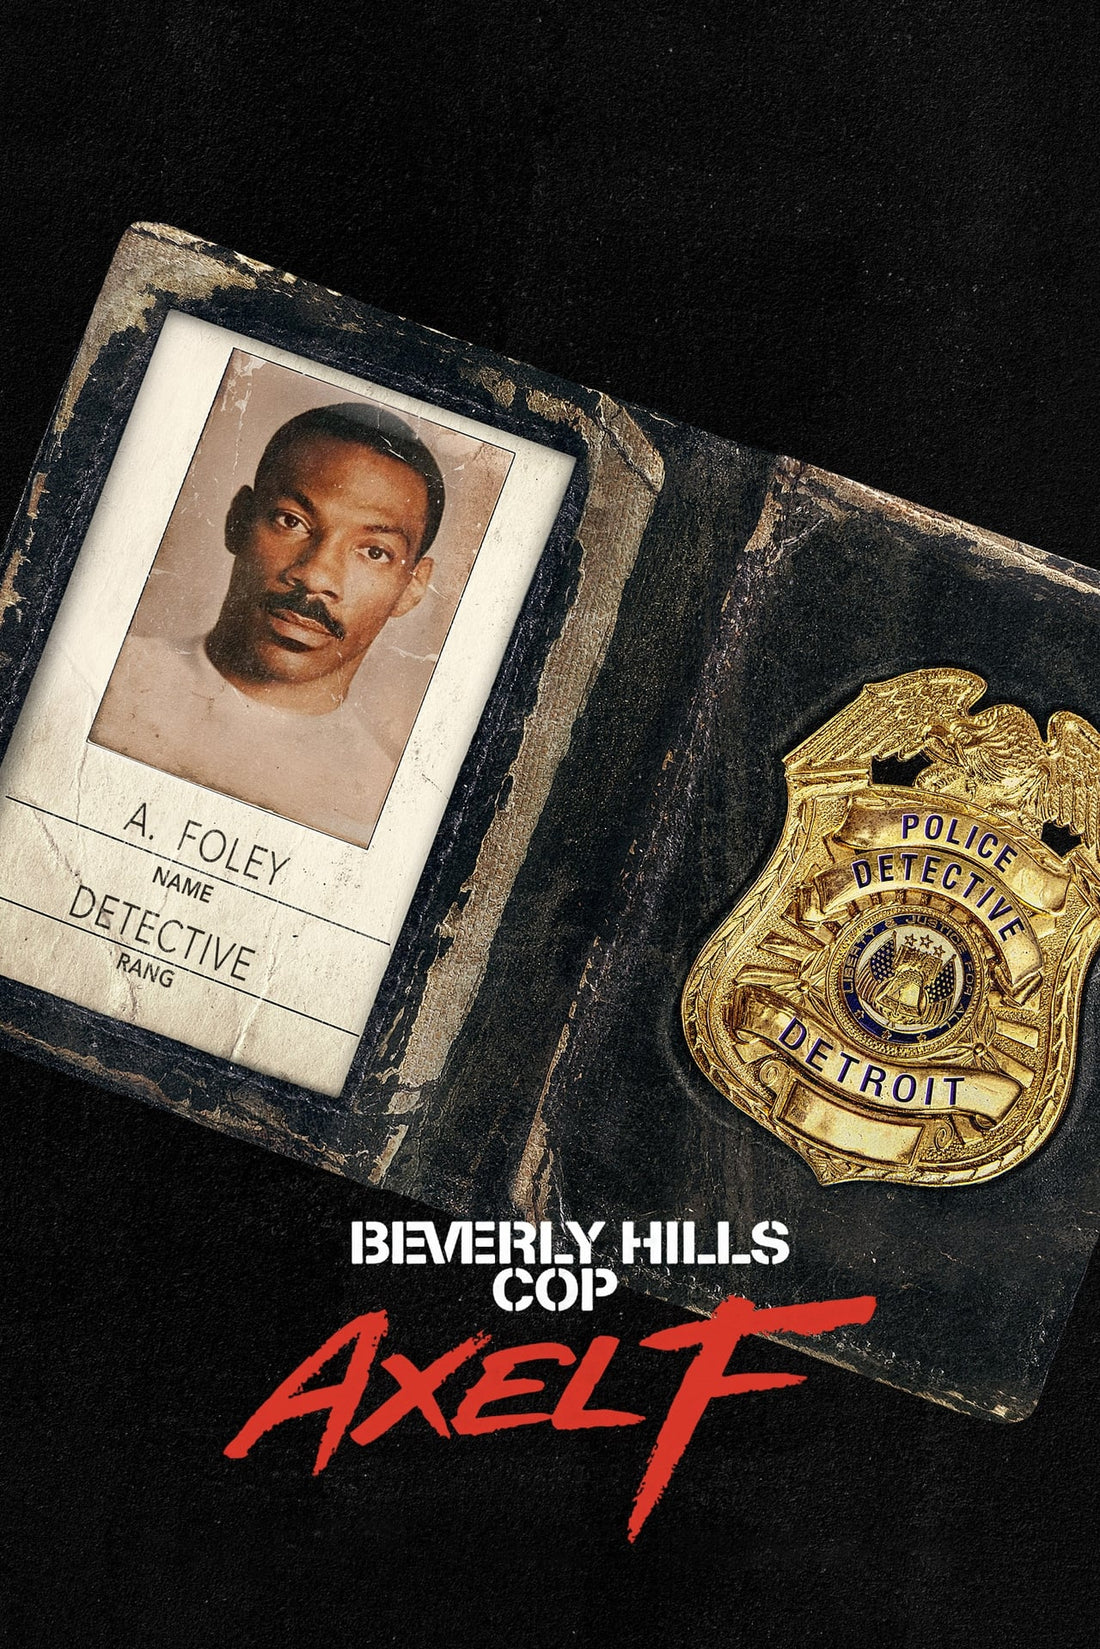 Where to watch, cast, trailer Beverly Hills Cop: Axel F